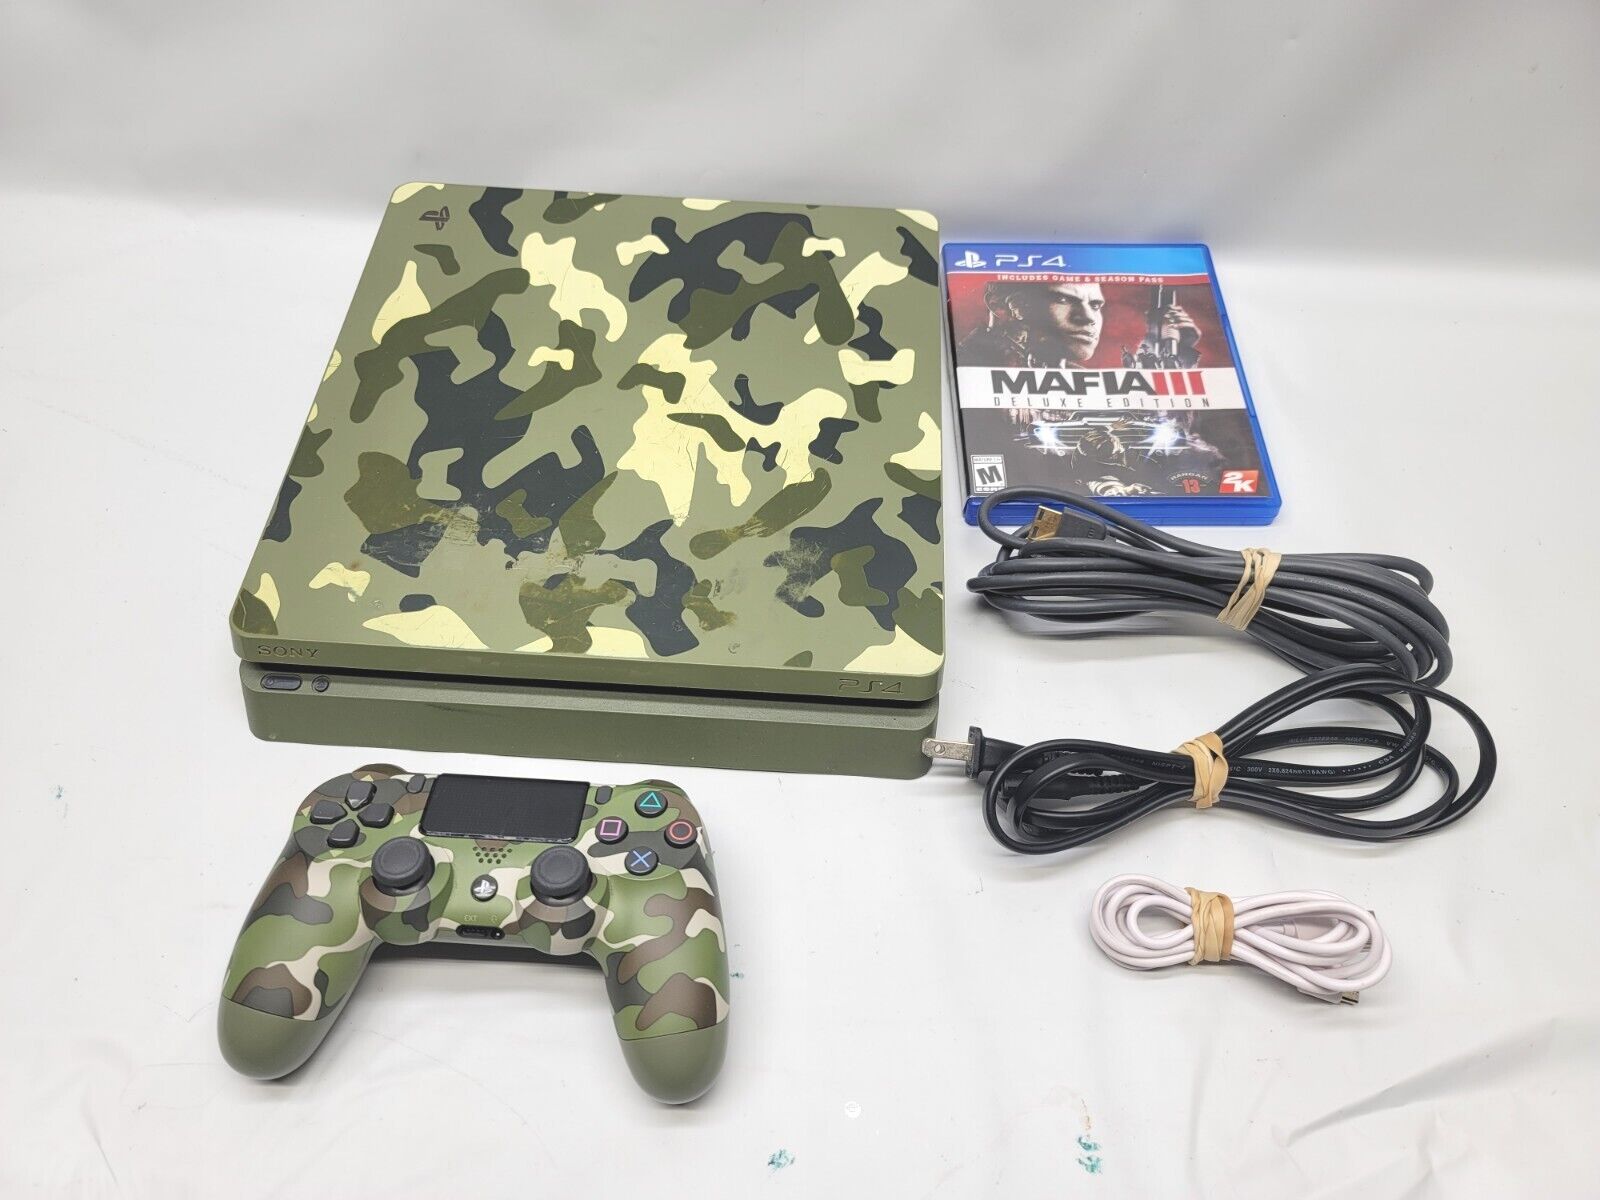 Withered video Leeds Sony PlayStation 4 PS4 Slim COD: WWII Limited Edition 1TB Green Camo  CUH-2115B | eBay